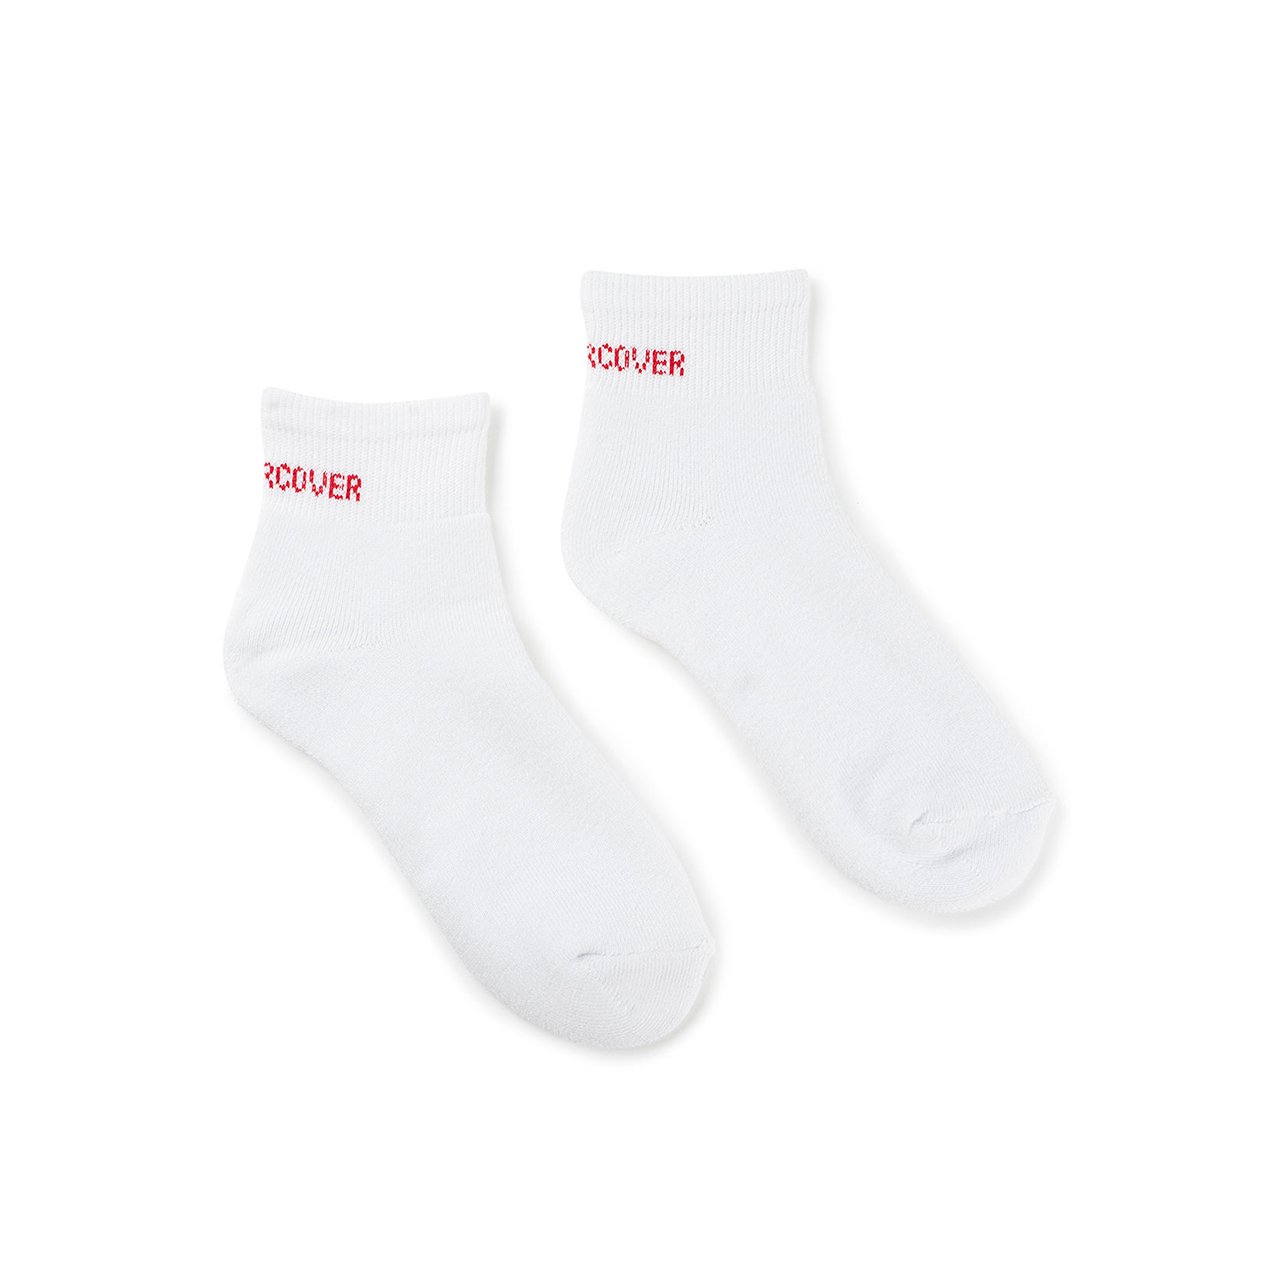 undercover undercover ucjq sneaker socks (off white) UCZ4L05-offwhite